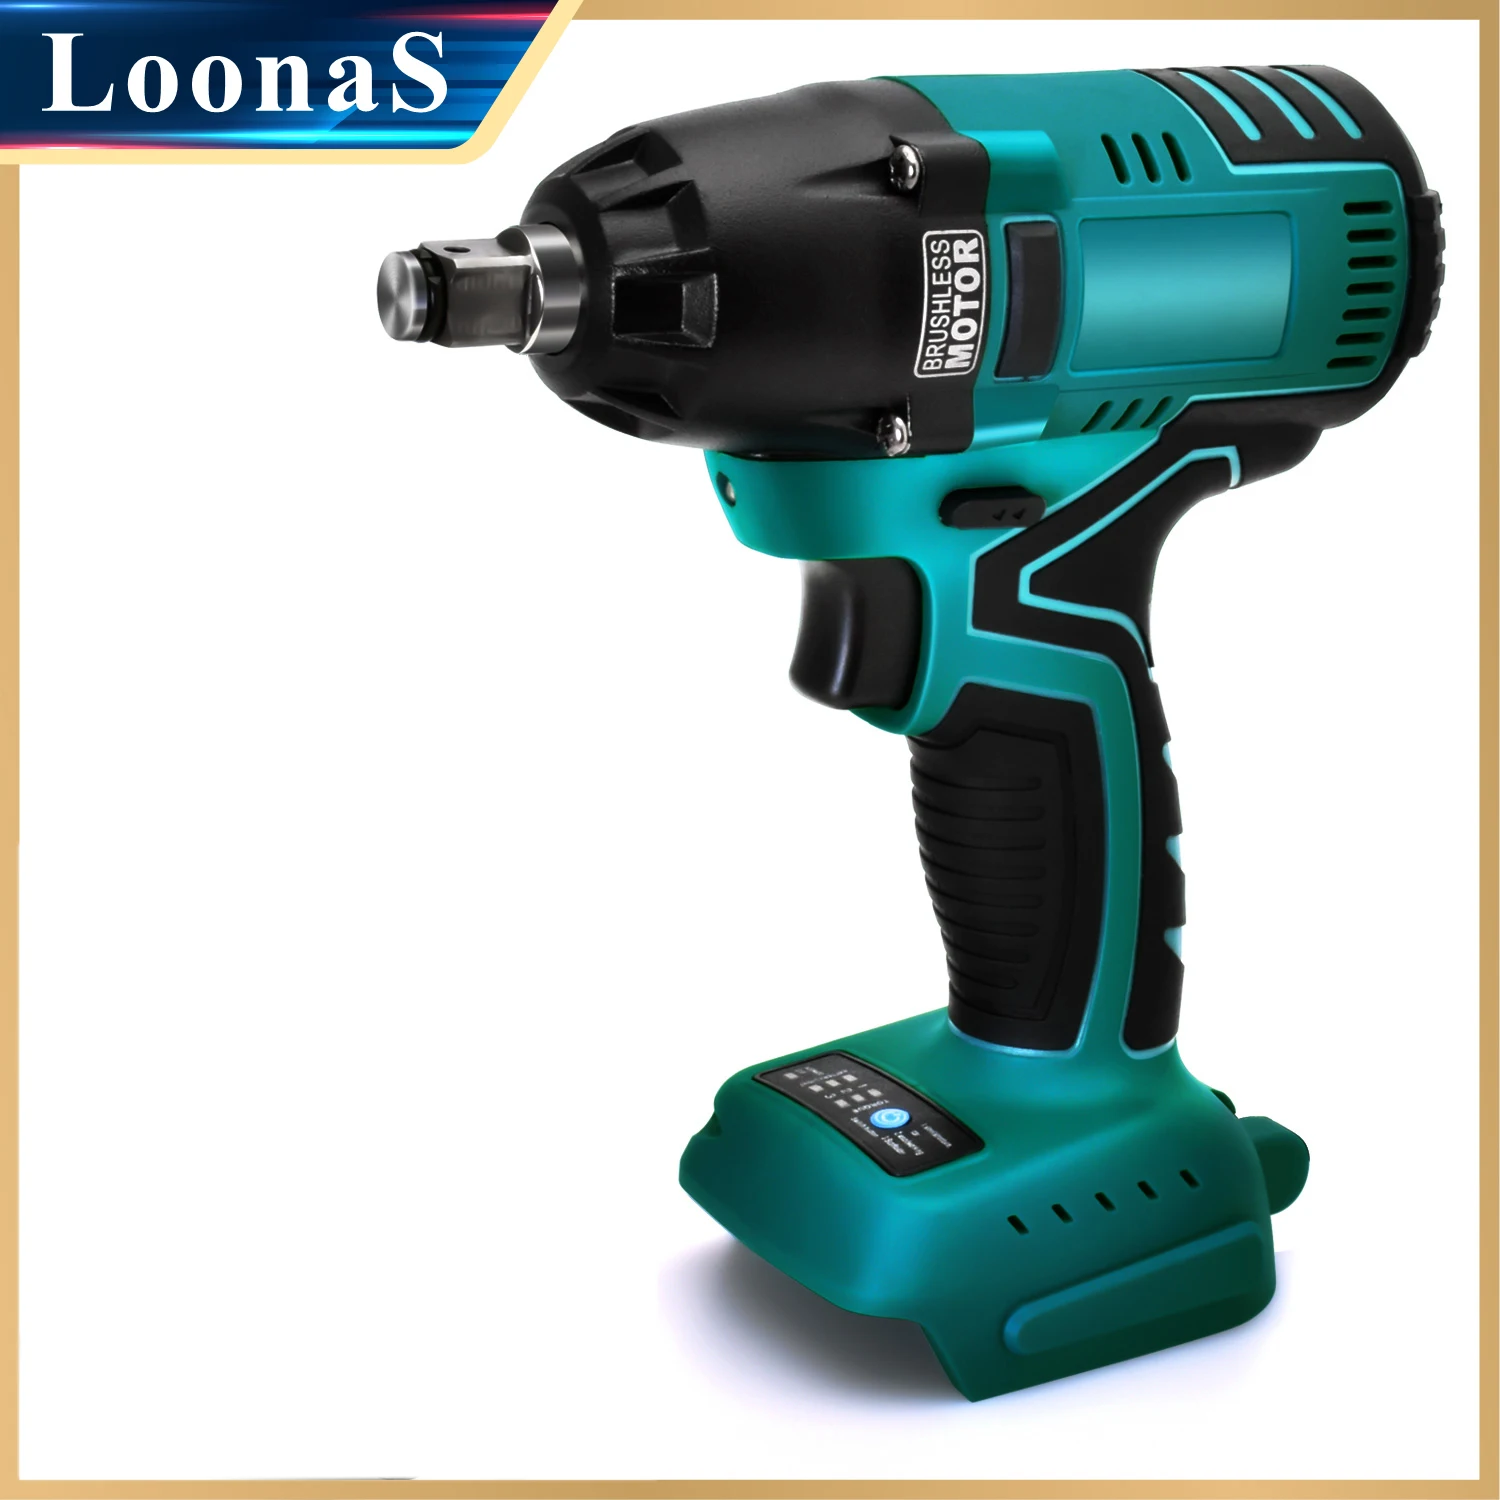 Loonas Cordless Electric Wrench Brushless Motor 400N.m High Torque LED Impact Lithium-Ion Battery Power Tools(without battery) dent al impla nt motor system surgical kit torque wrench 20 1 dent al impla nt handpiece